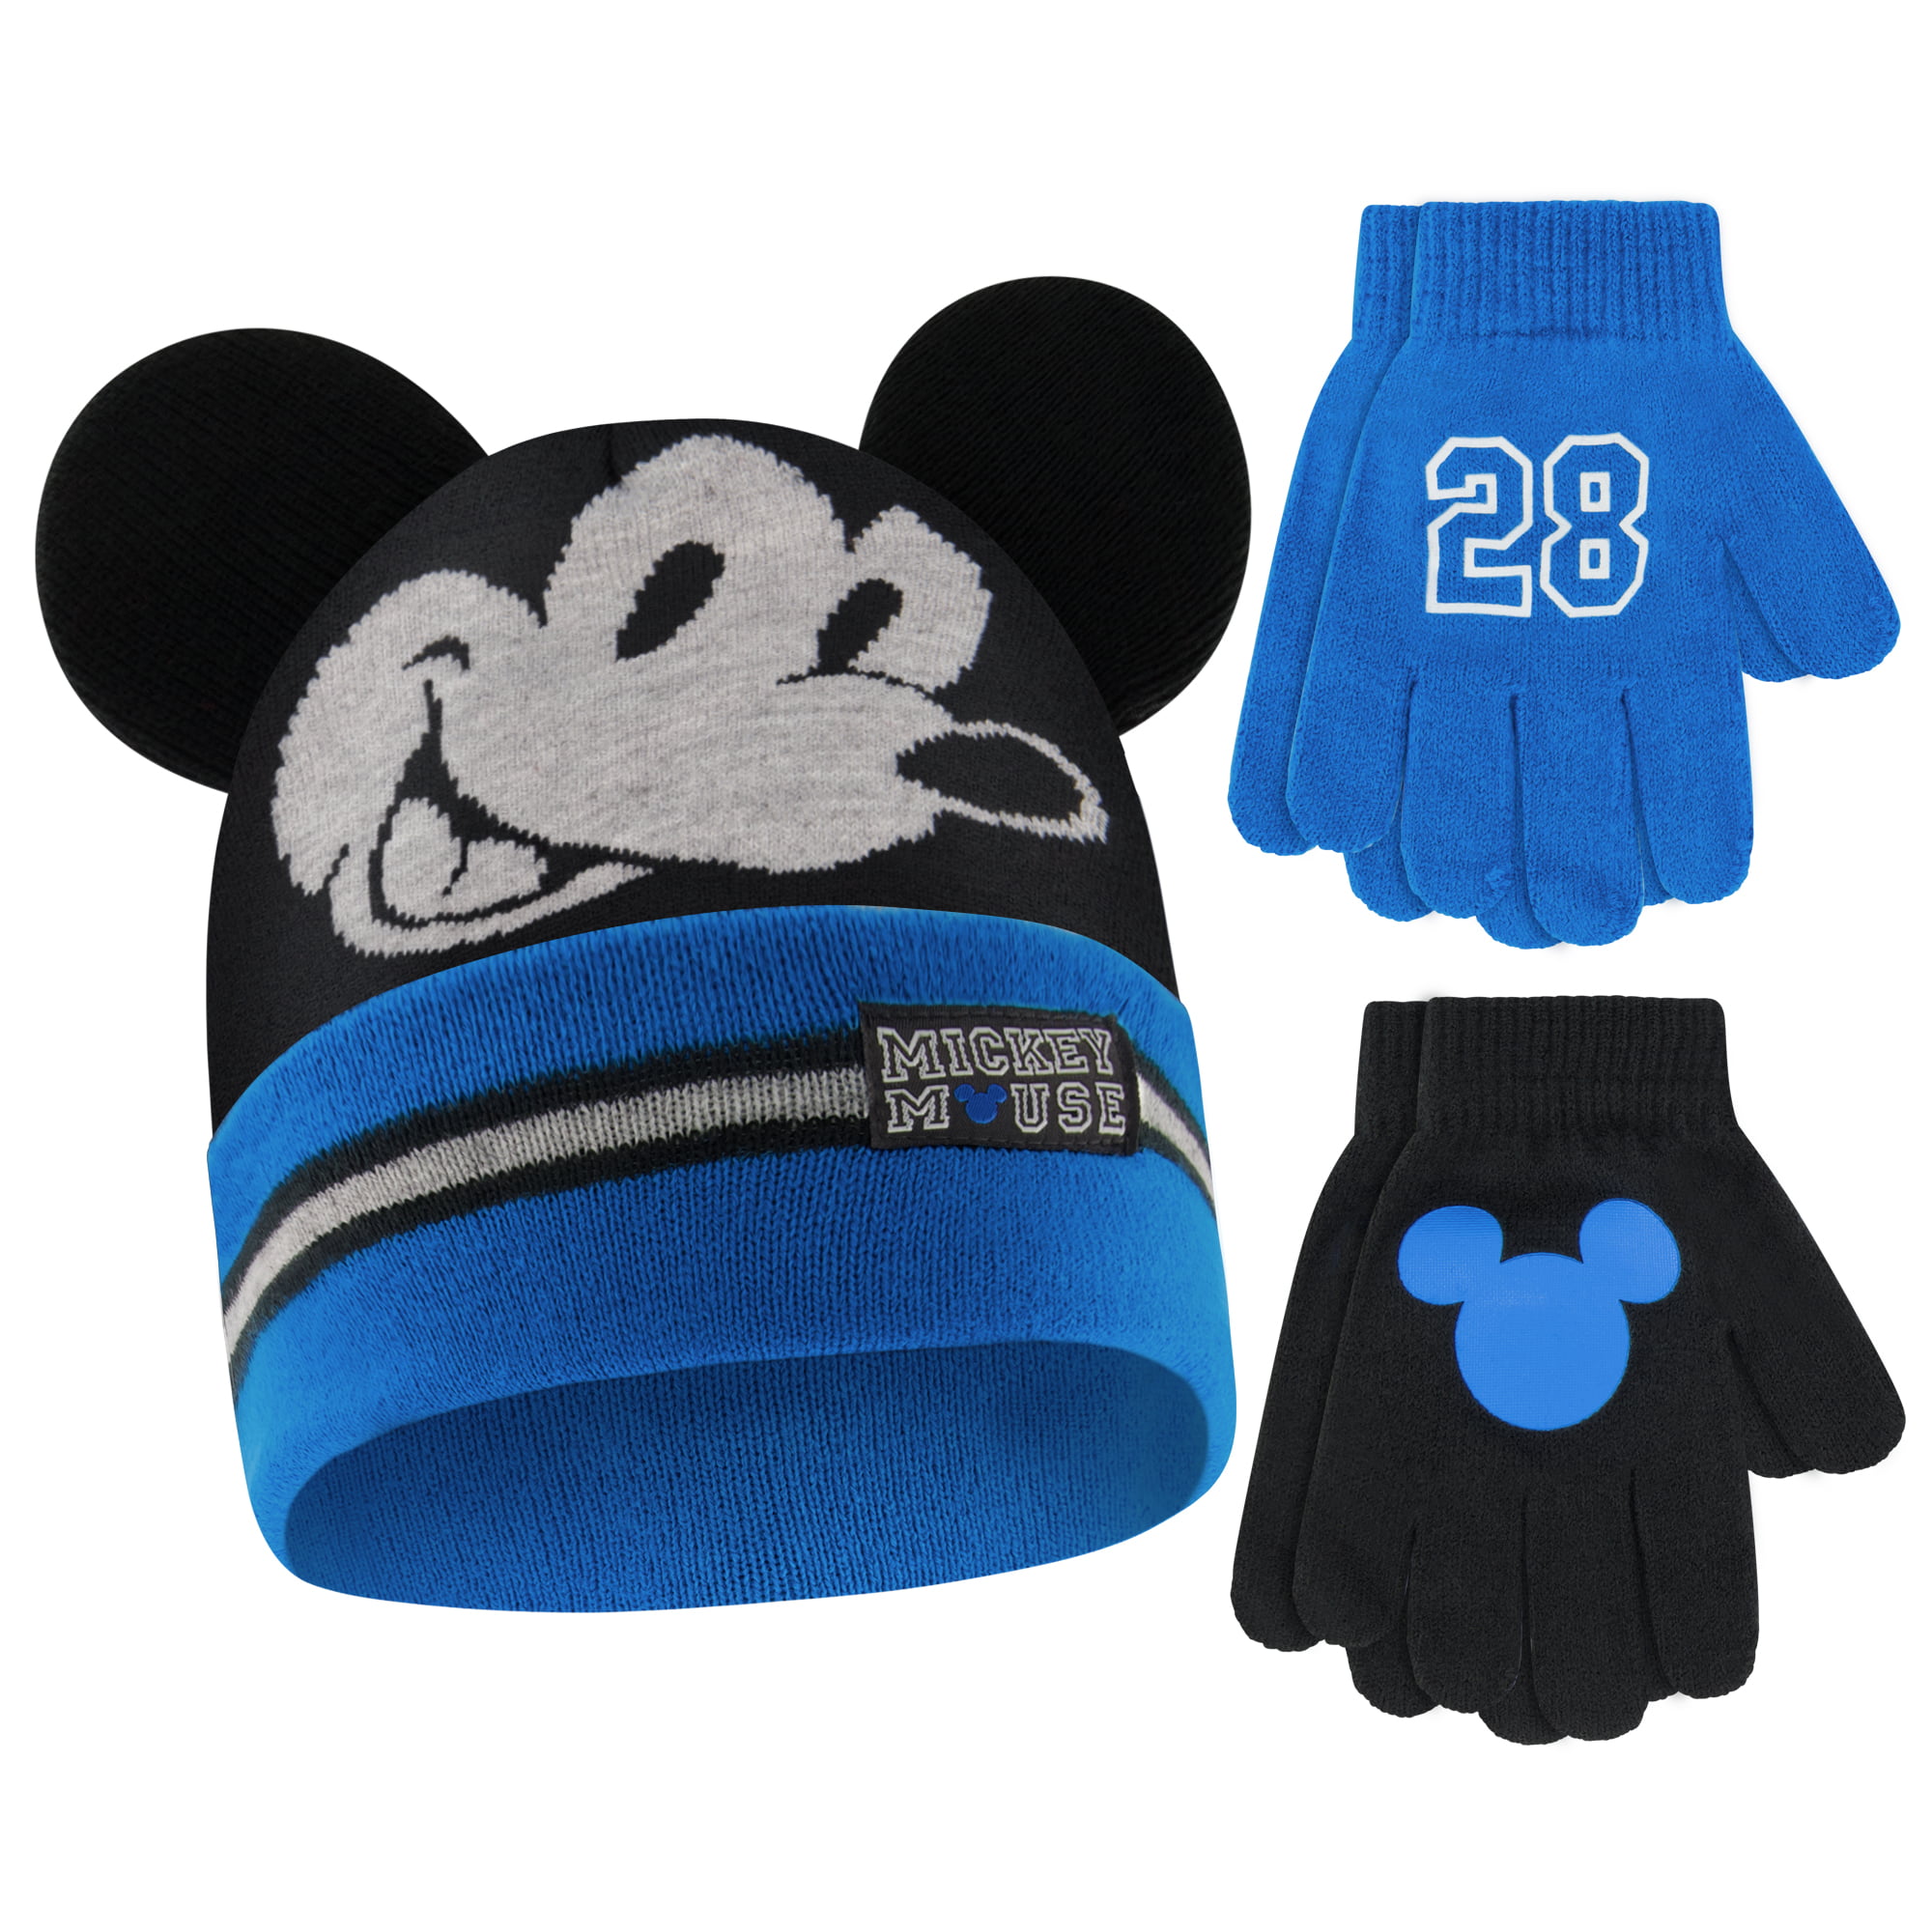 Disney Boys Mickey Mouse Winter Hat and 2 Pair Mitten or Gloves Set Age 2-7 